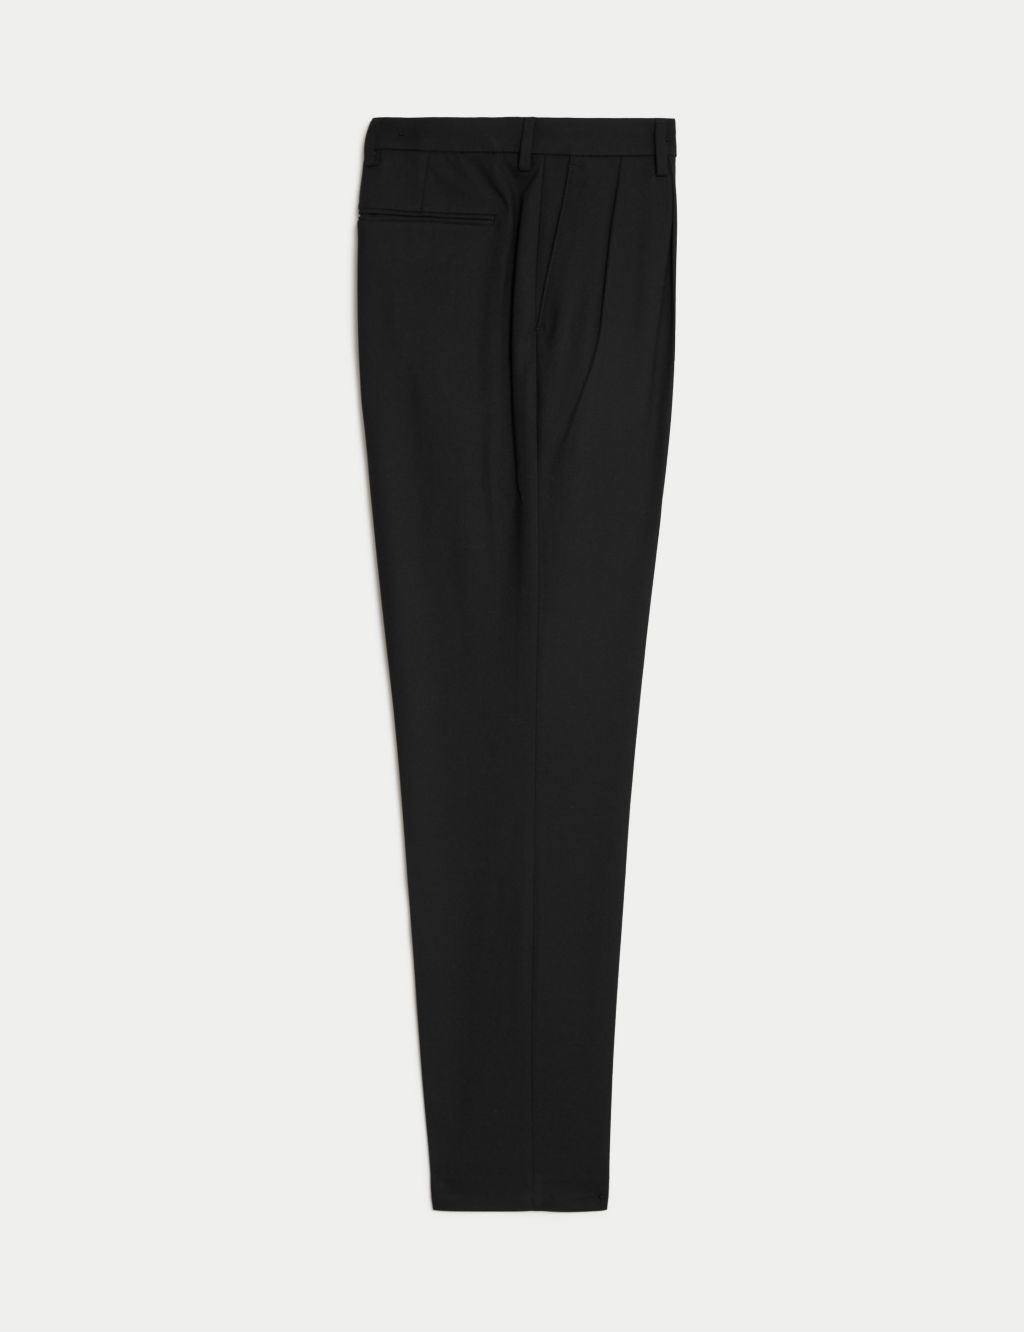 Twin Pleat Stretch Trousers image 1